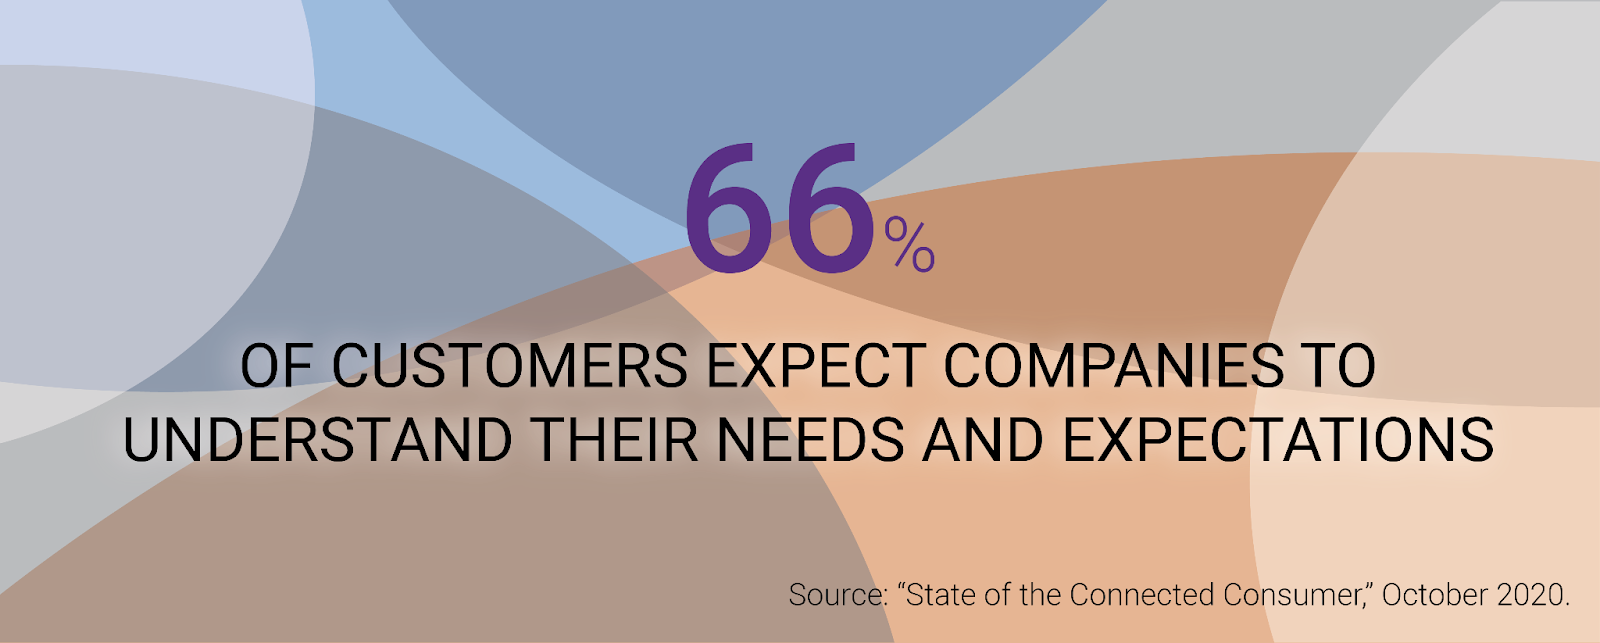 66% of customers expect companies to understand their needs and expectations.